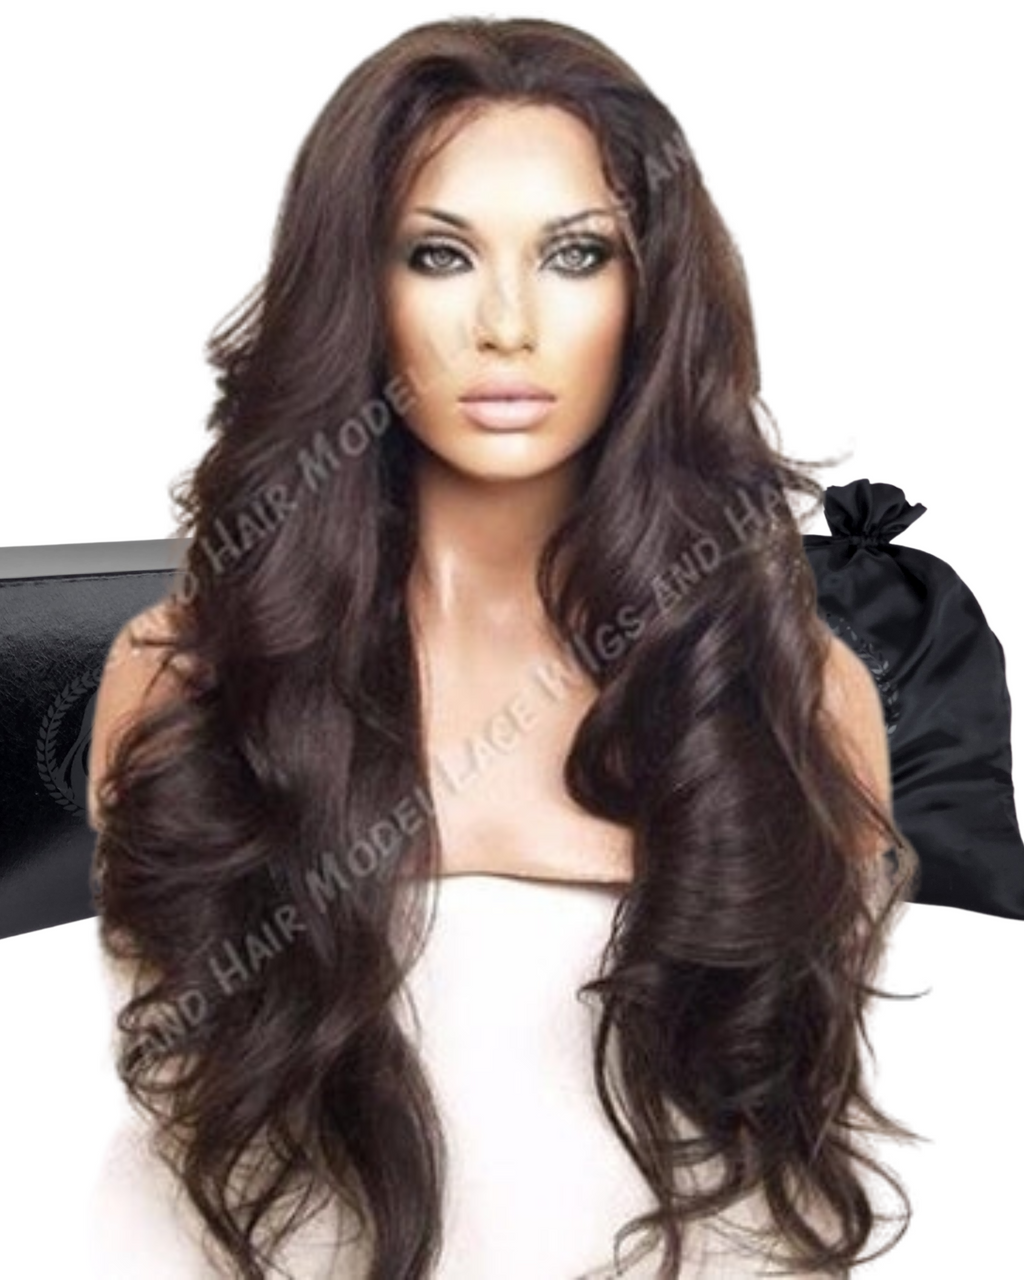 Full Lace Wig Opulent Collection (Erica) Item#: 6621